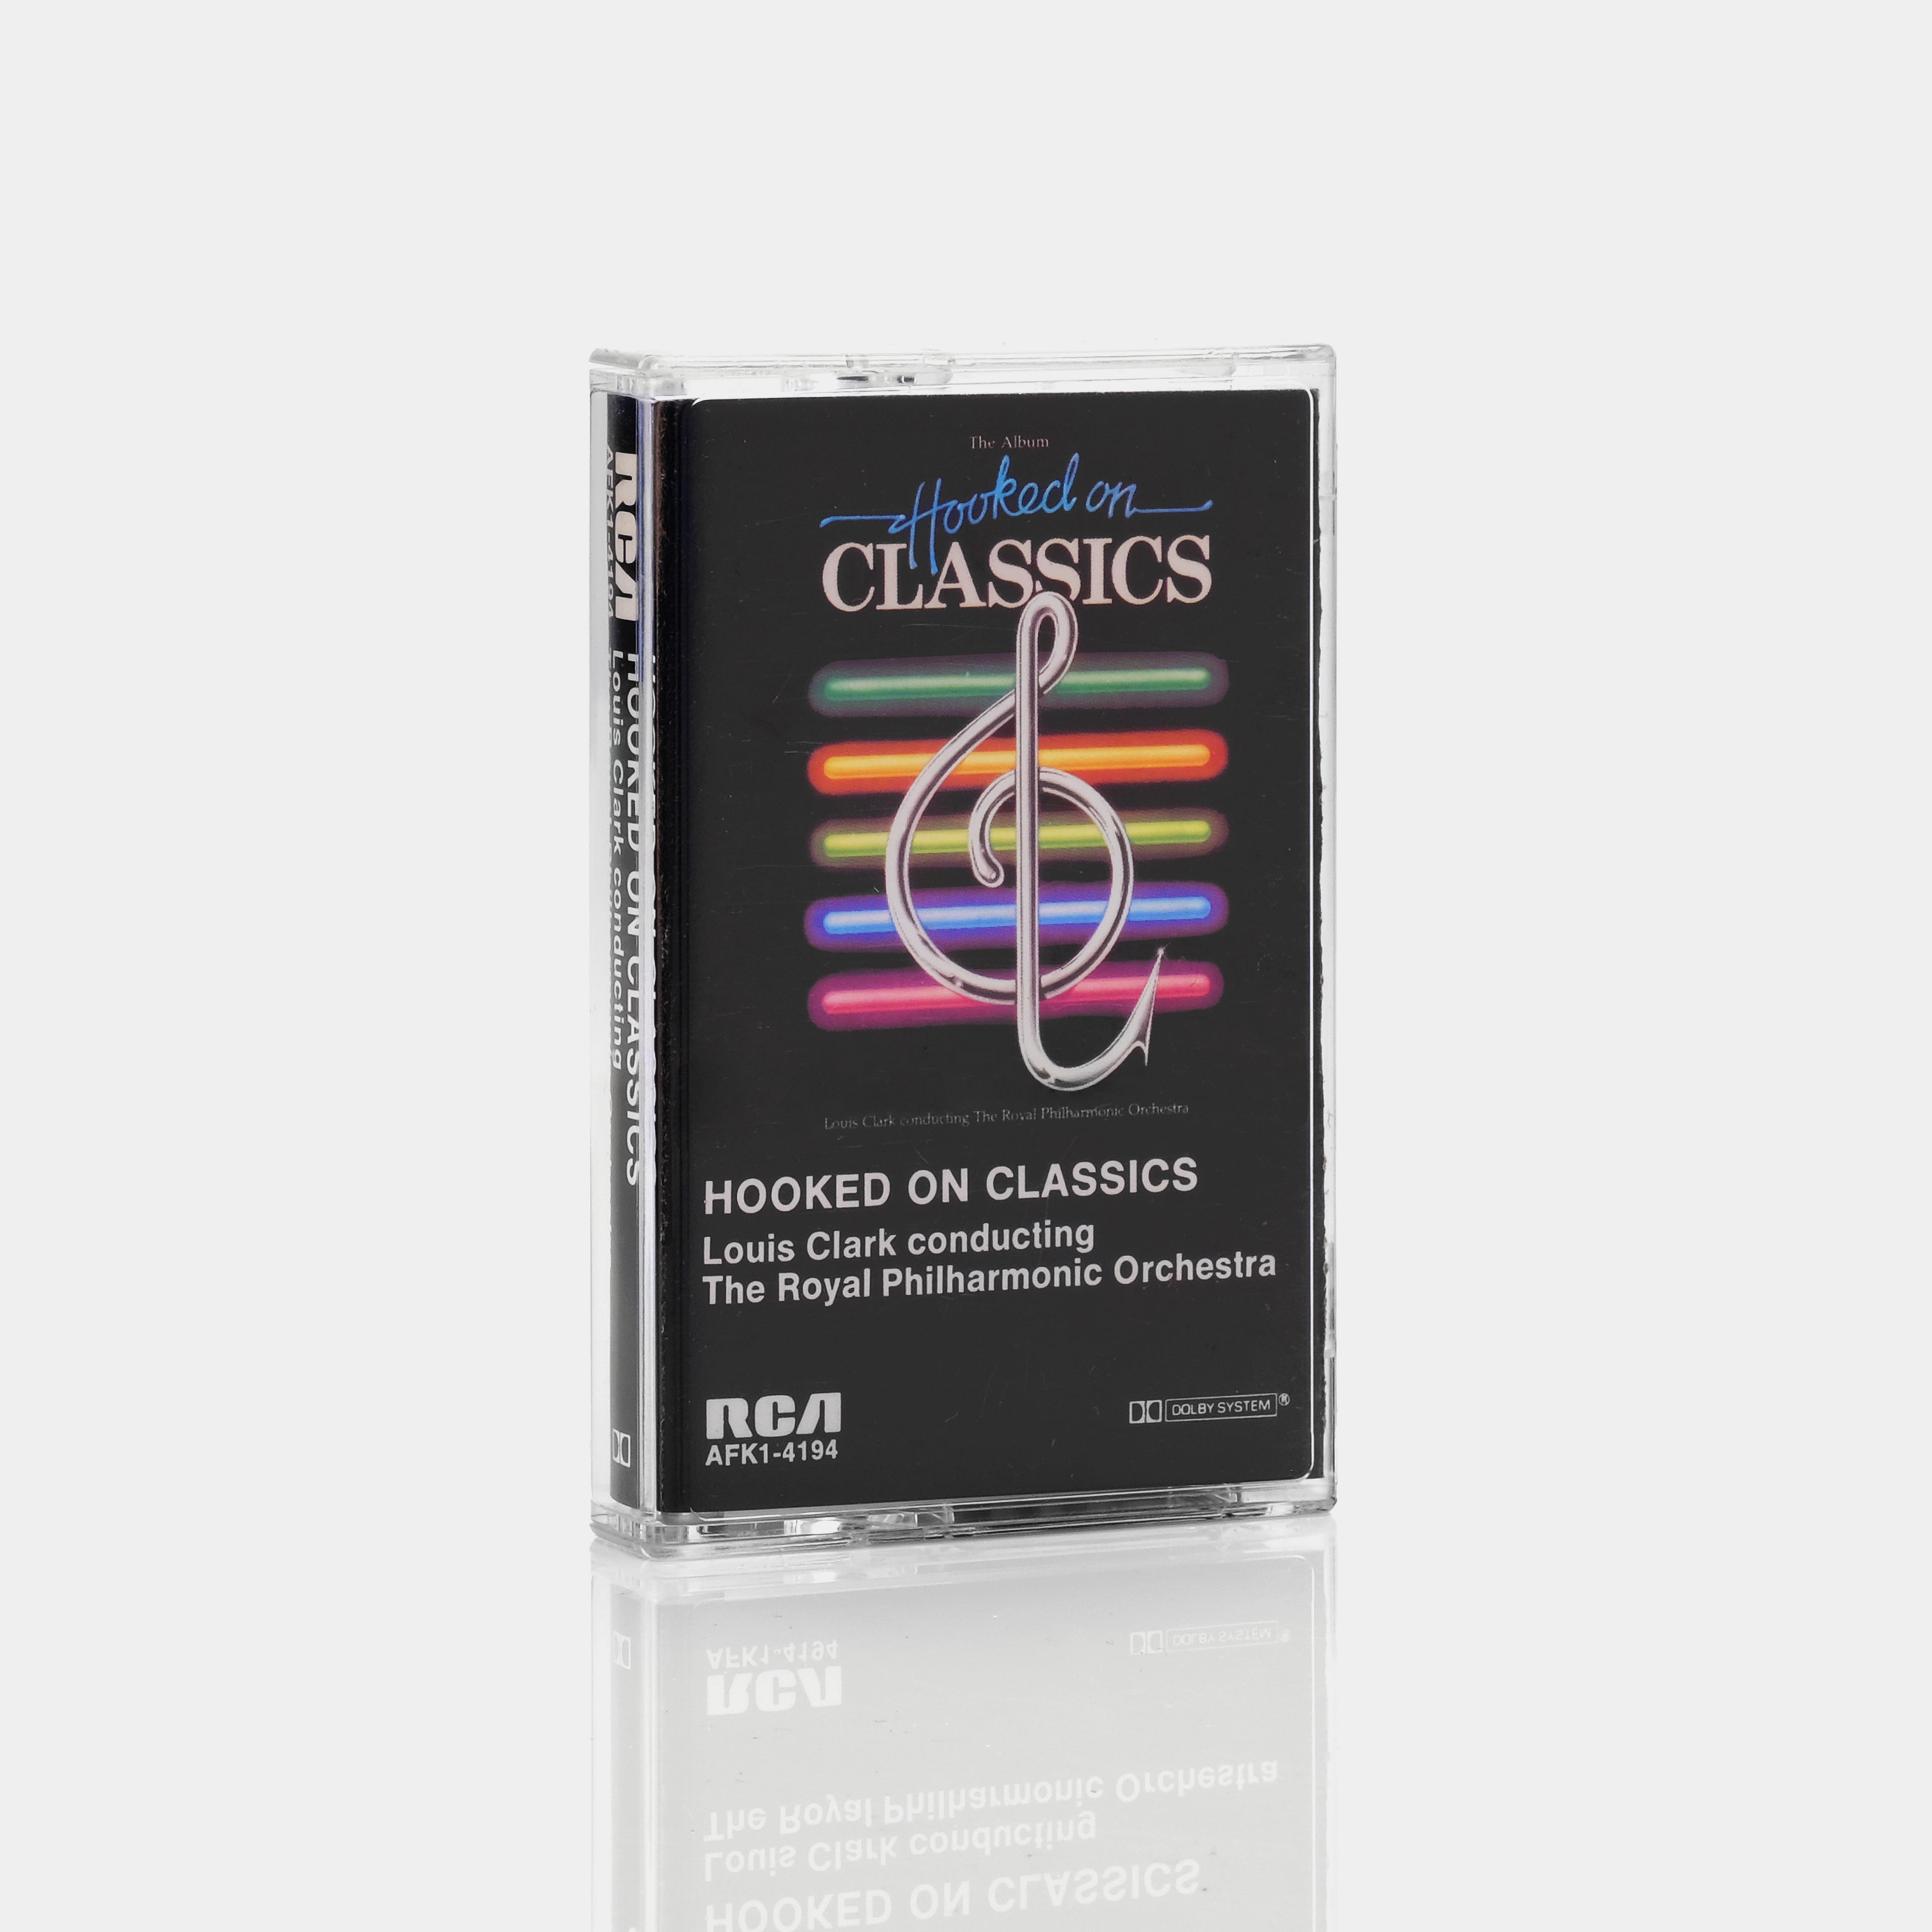 Louis Clark Conducting The Royal Philharmonic Orchestra - Hooked On Classics Cassette Tape